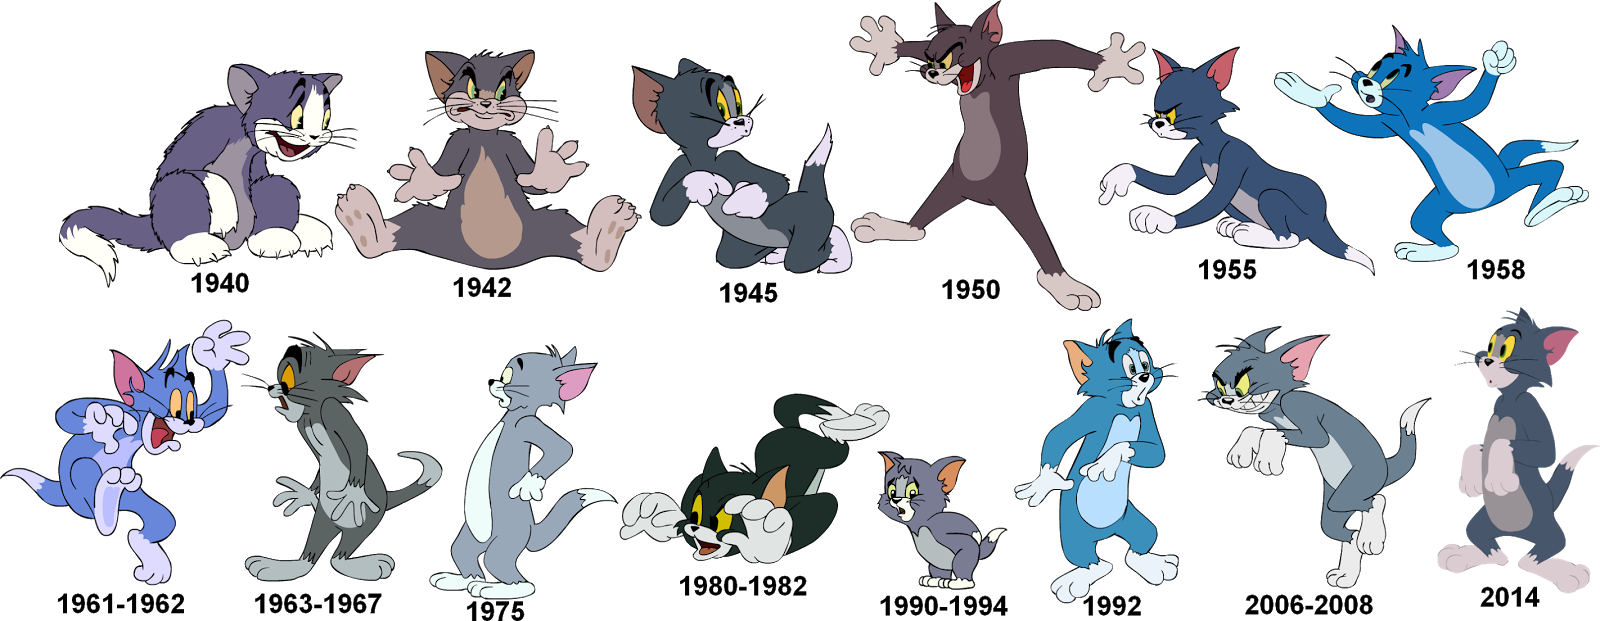 Evolution of tom and jerry 1940 to 2021